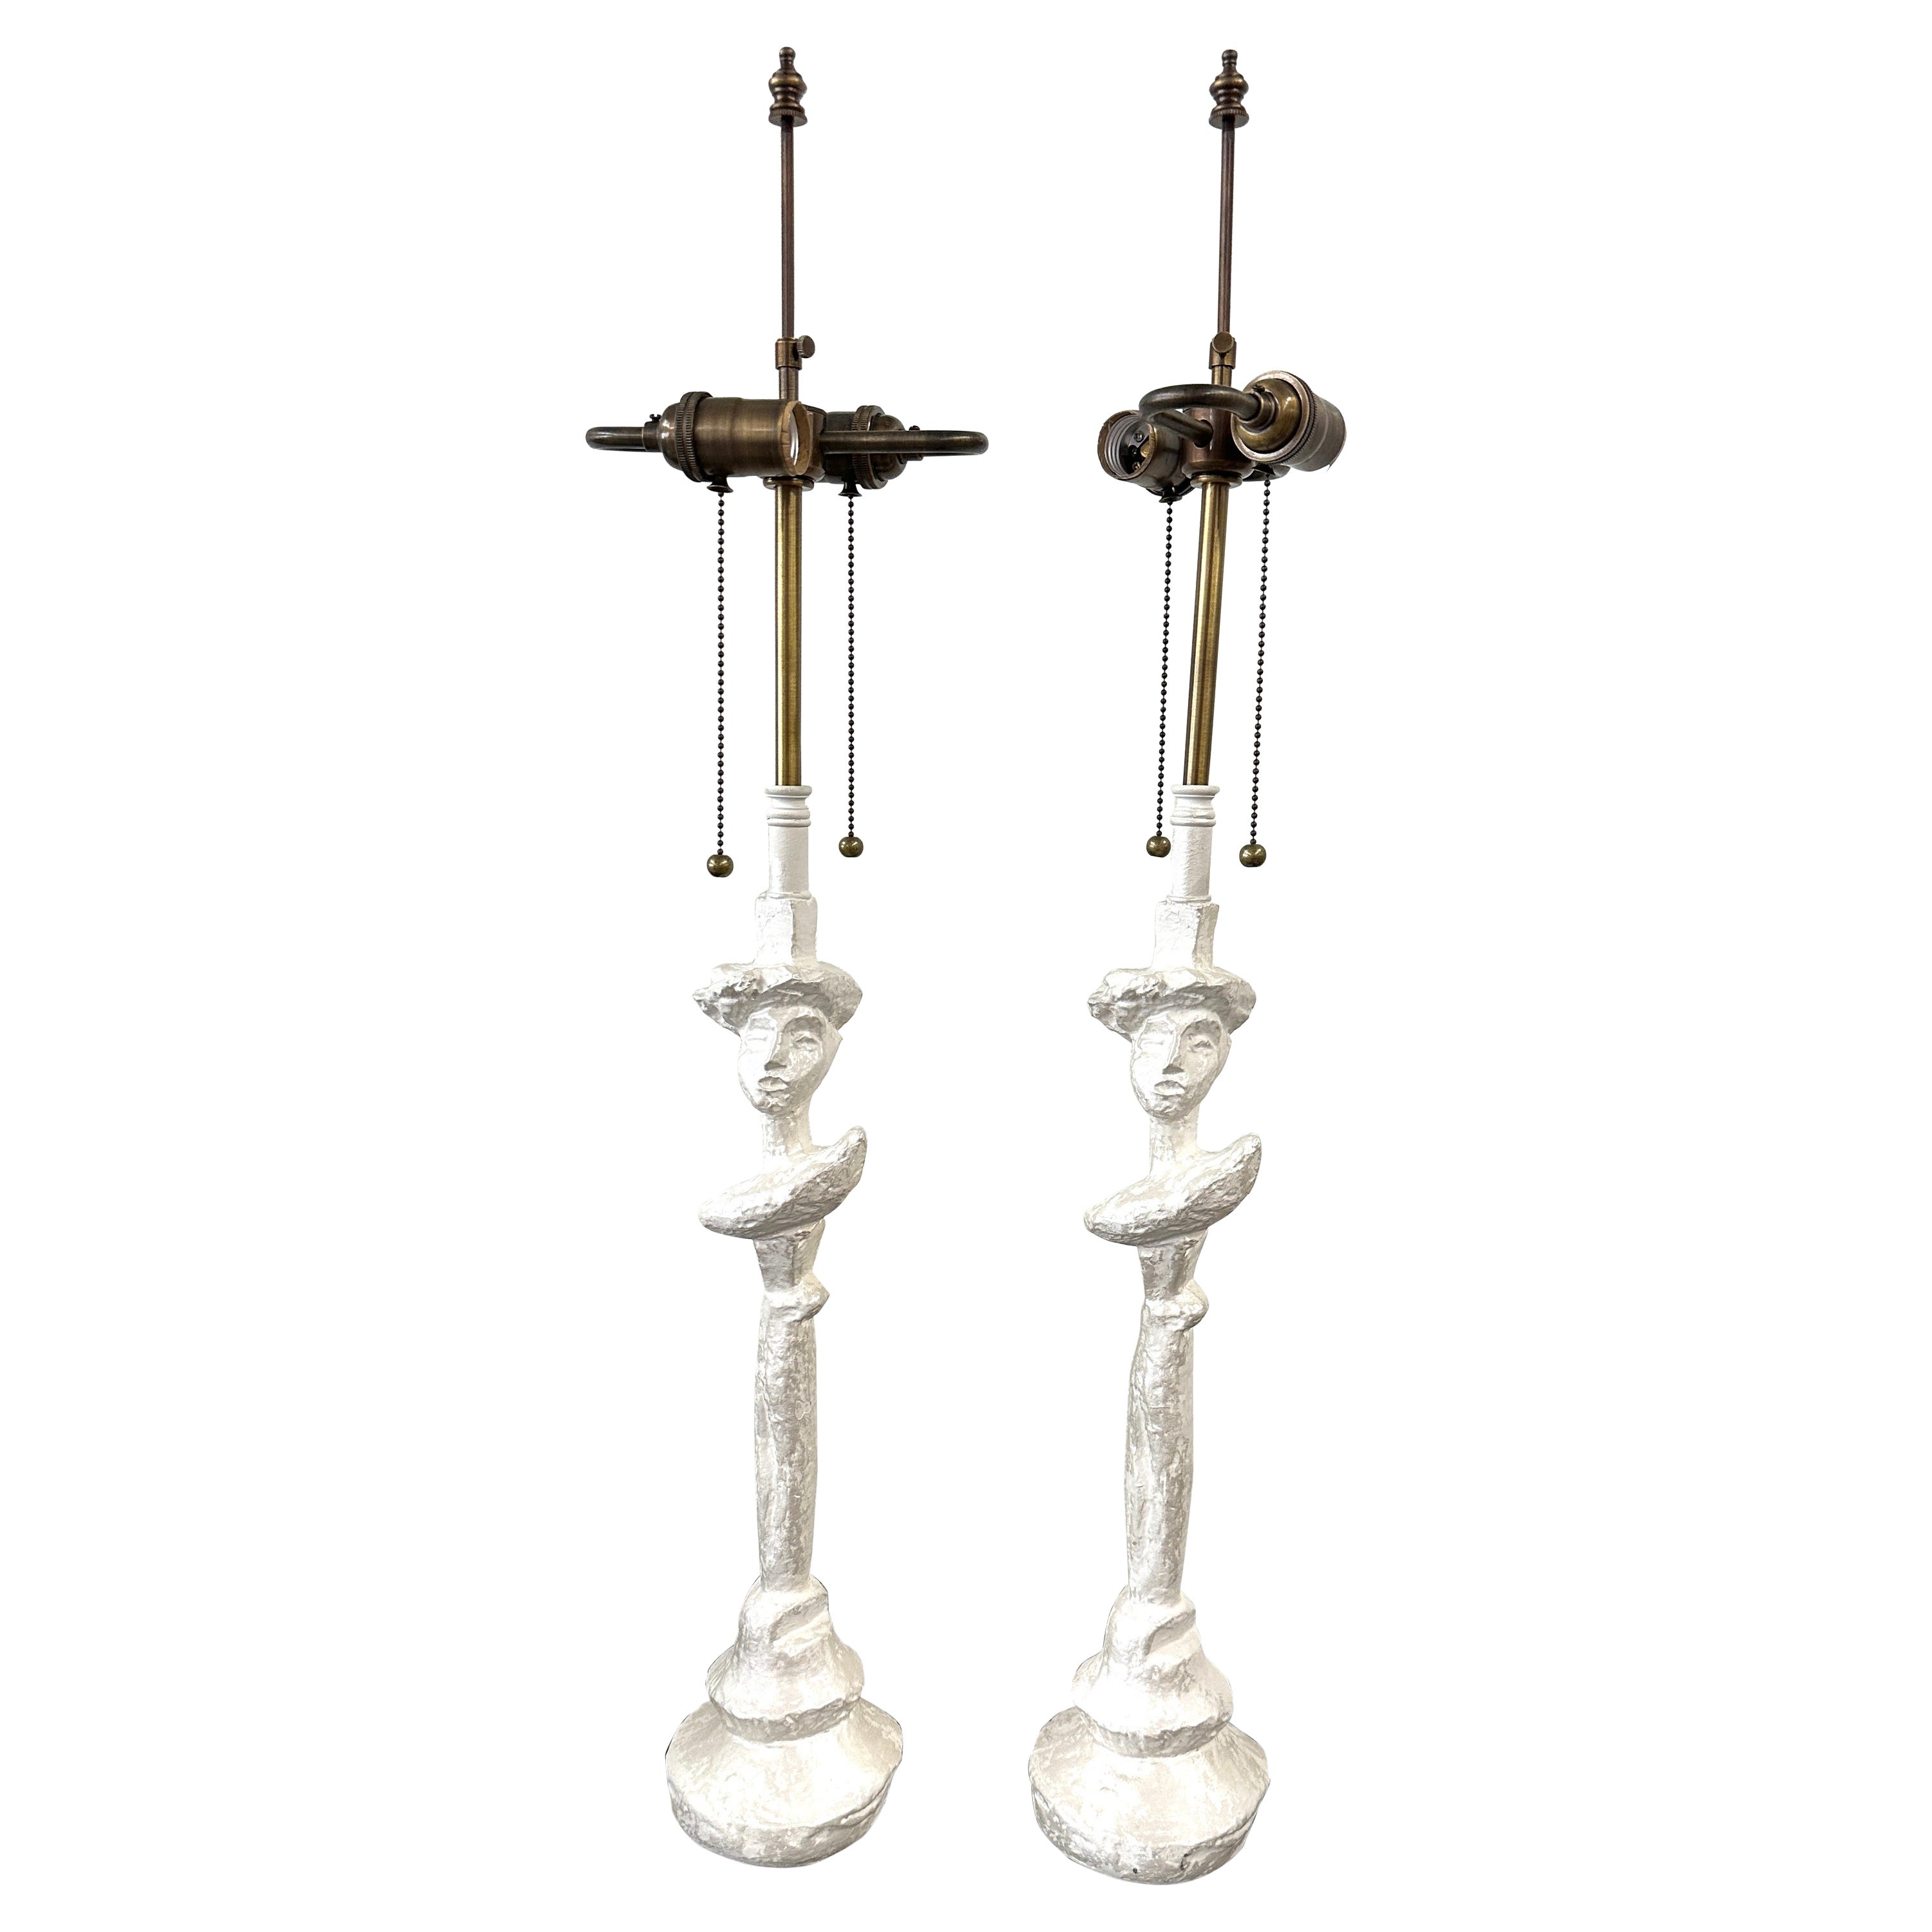 Giacometti Syrie Maugham Style “Tete de Femme” Plaster Lamps For Sale